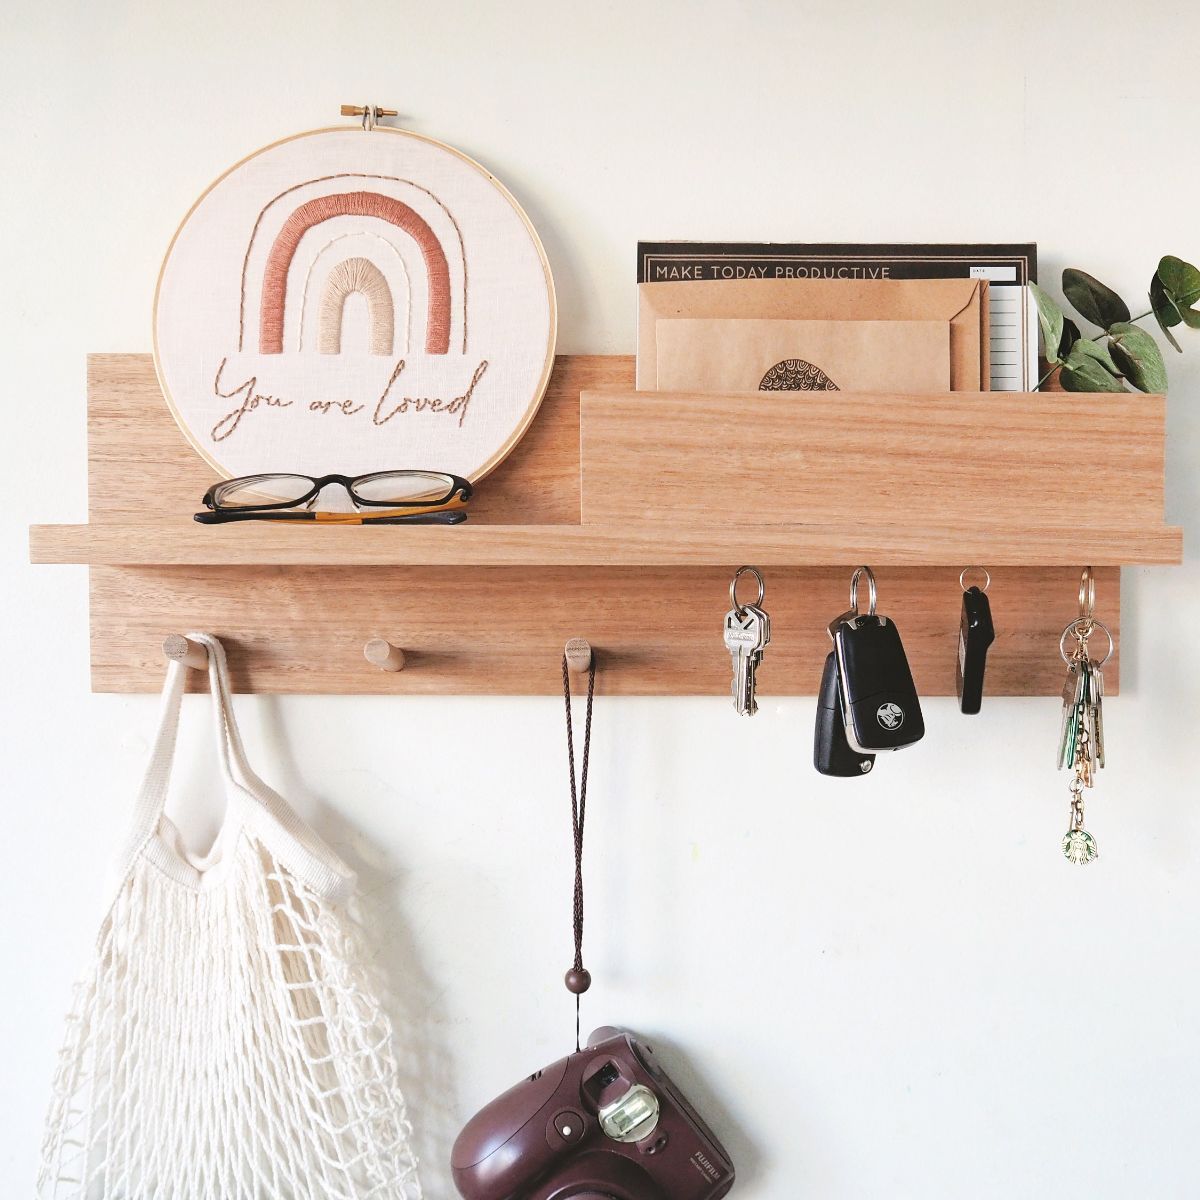 A 55cm Tasmanian Oak Entryway Shelf with mail holder, coat pegs and magnetic key holders